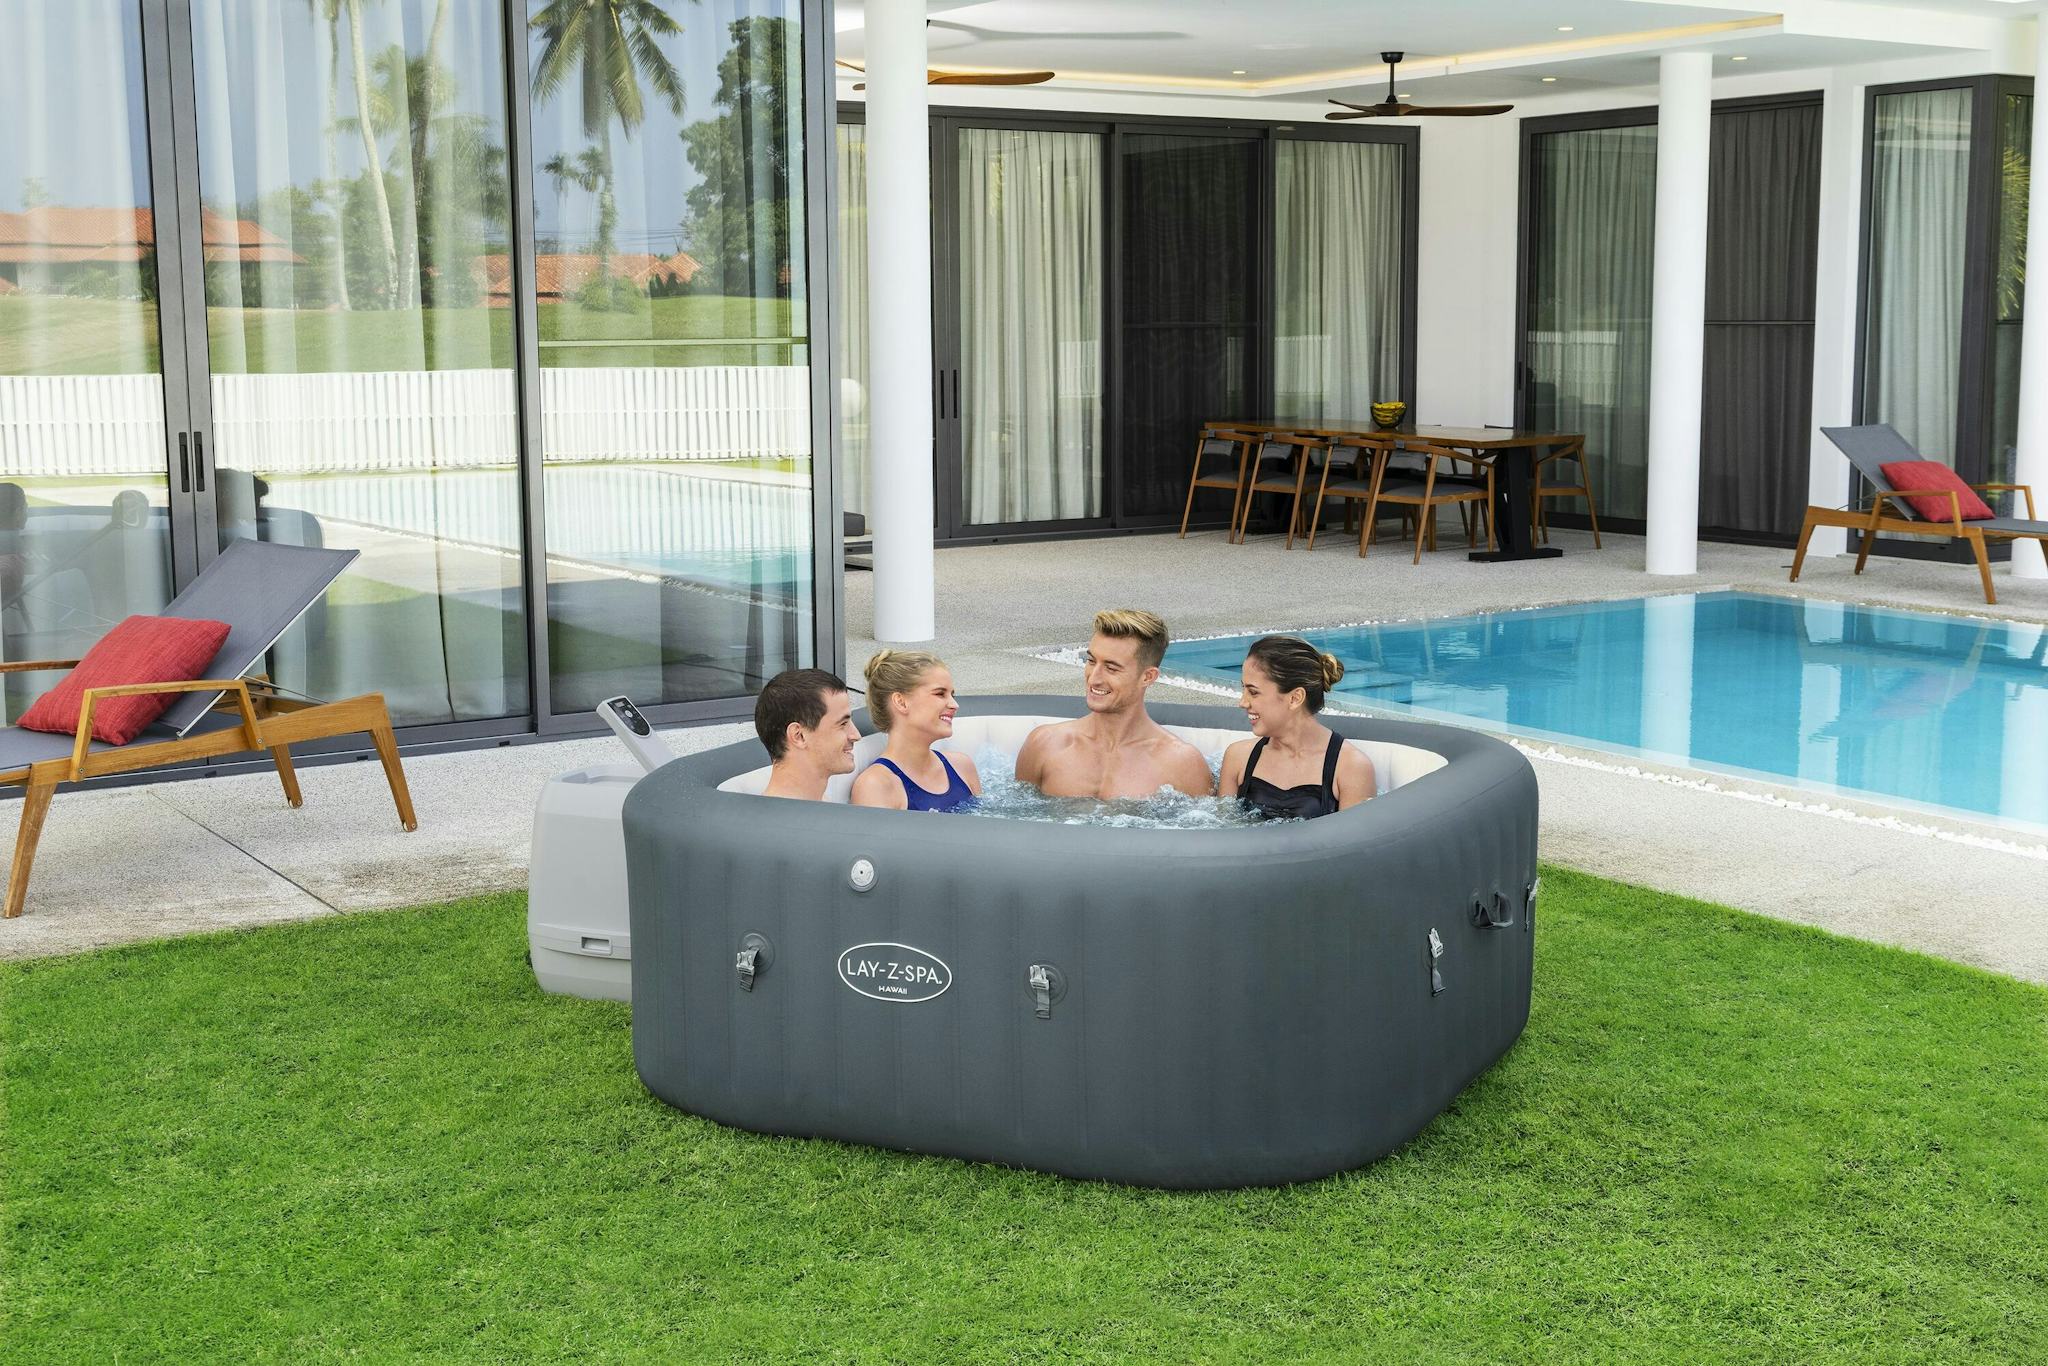 Spas Gonflables Spa gonflable carré Lay-Z-Spa Hawaii Hydrojet Pro™ 4 - 6 personnes Bestway 13